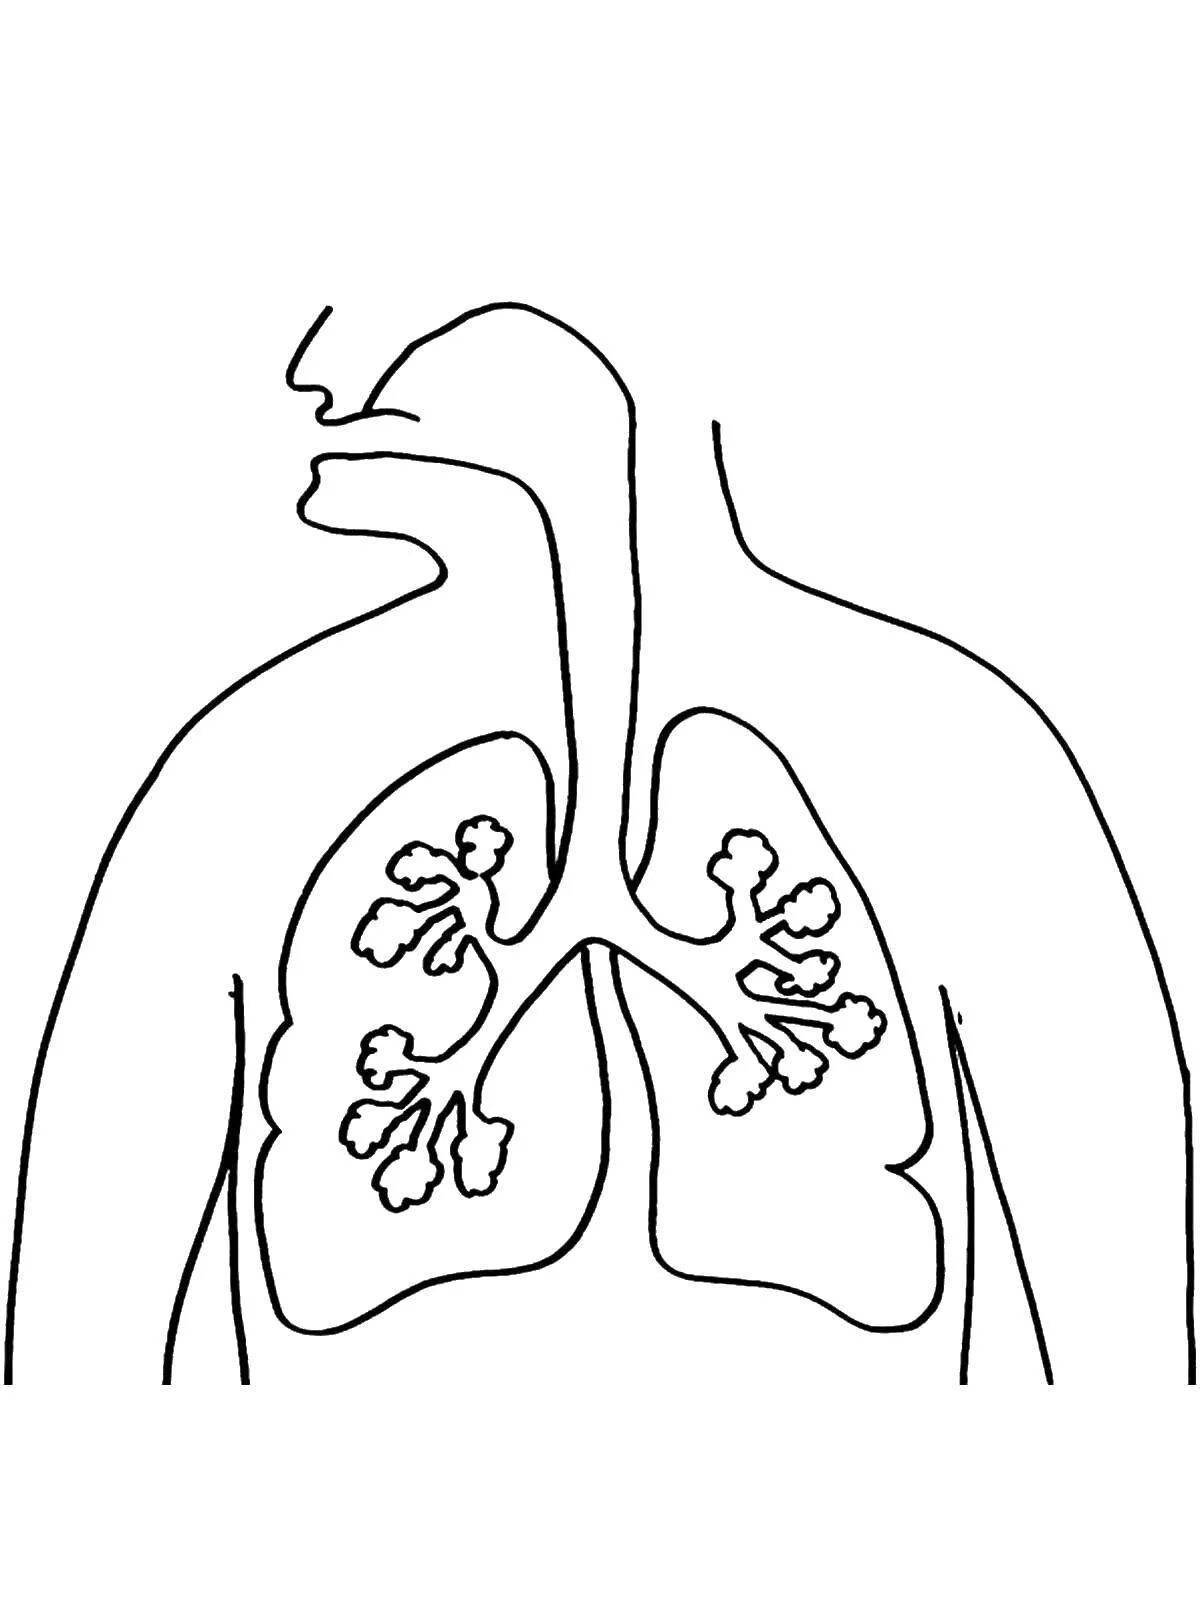 Respiratory system fun coloring page